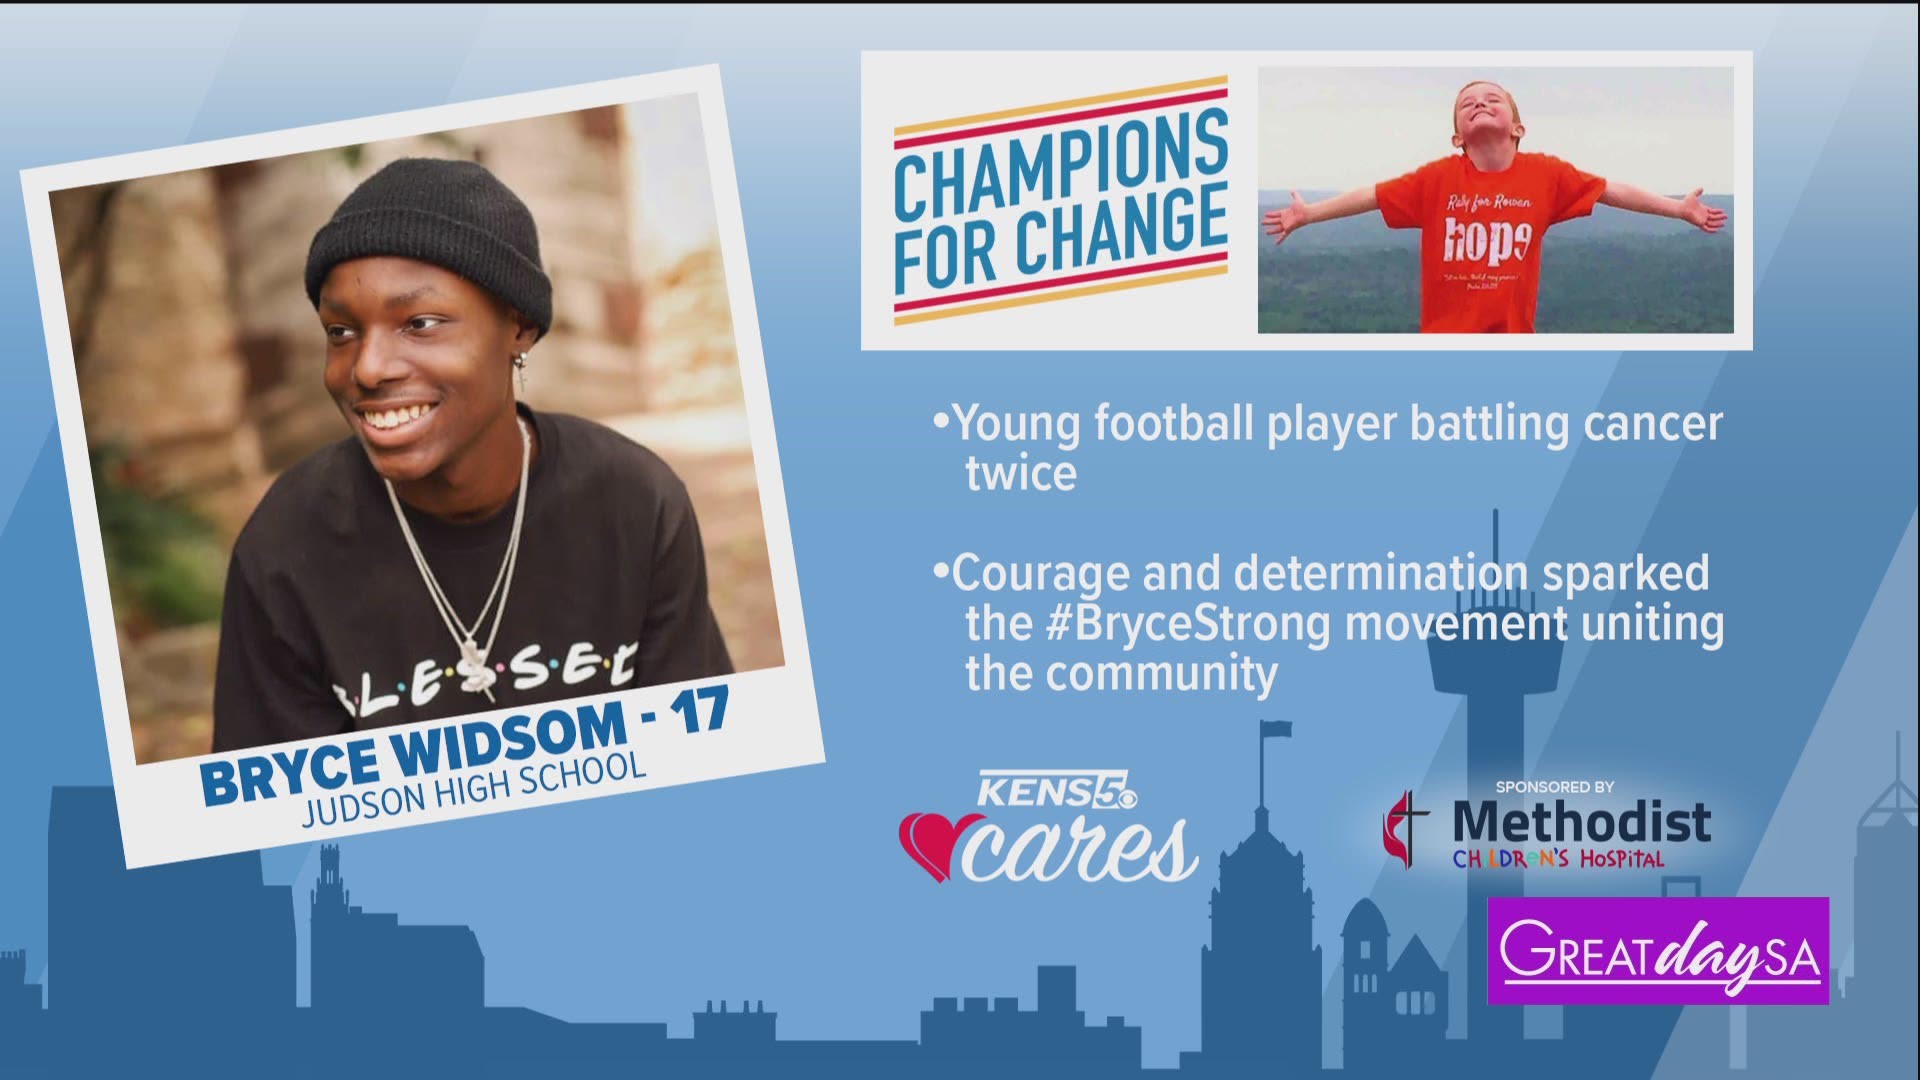 Our latest Champion for Change shines bright in our community. Bryce Widsom is a football player at Judson High School who has battled cancer twice.